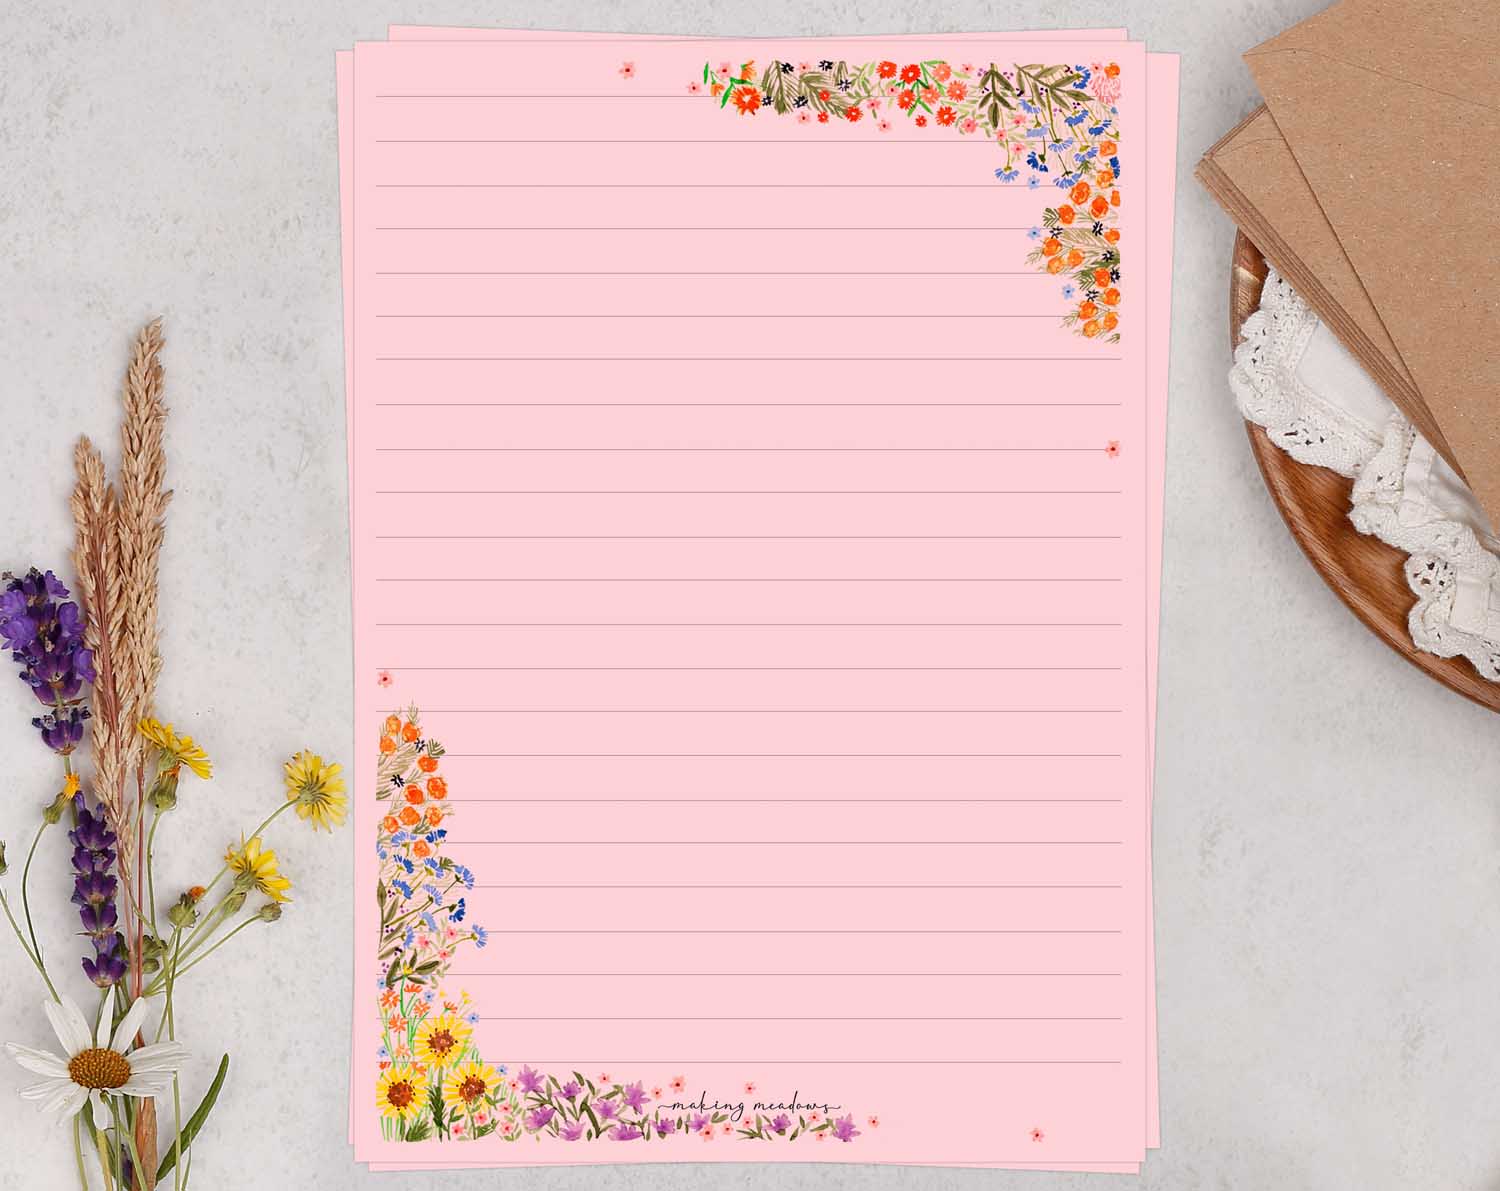 Pink A5 letter writing paper sheets with a watercolour garden flower design.